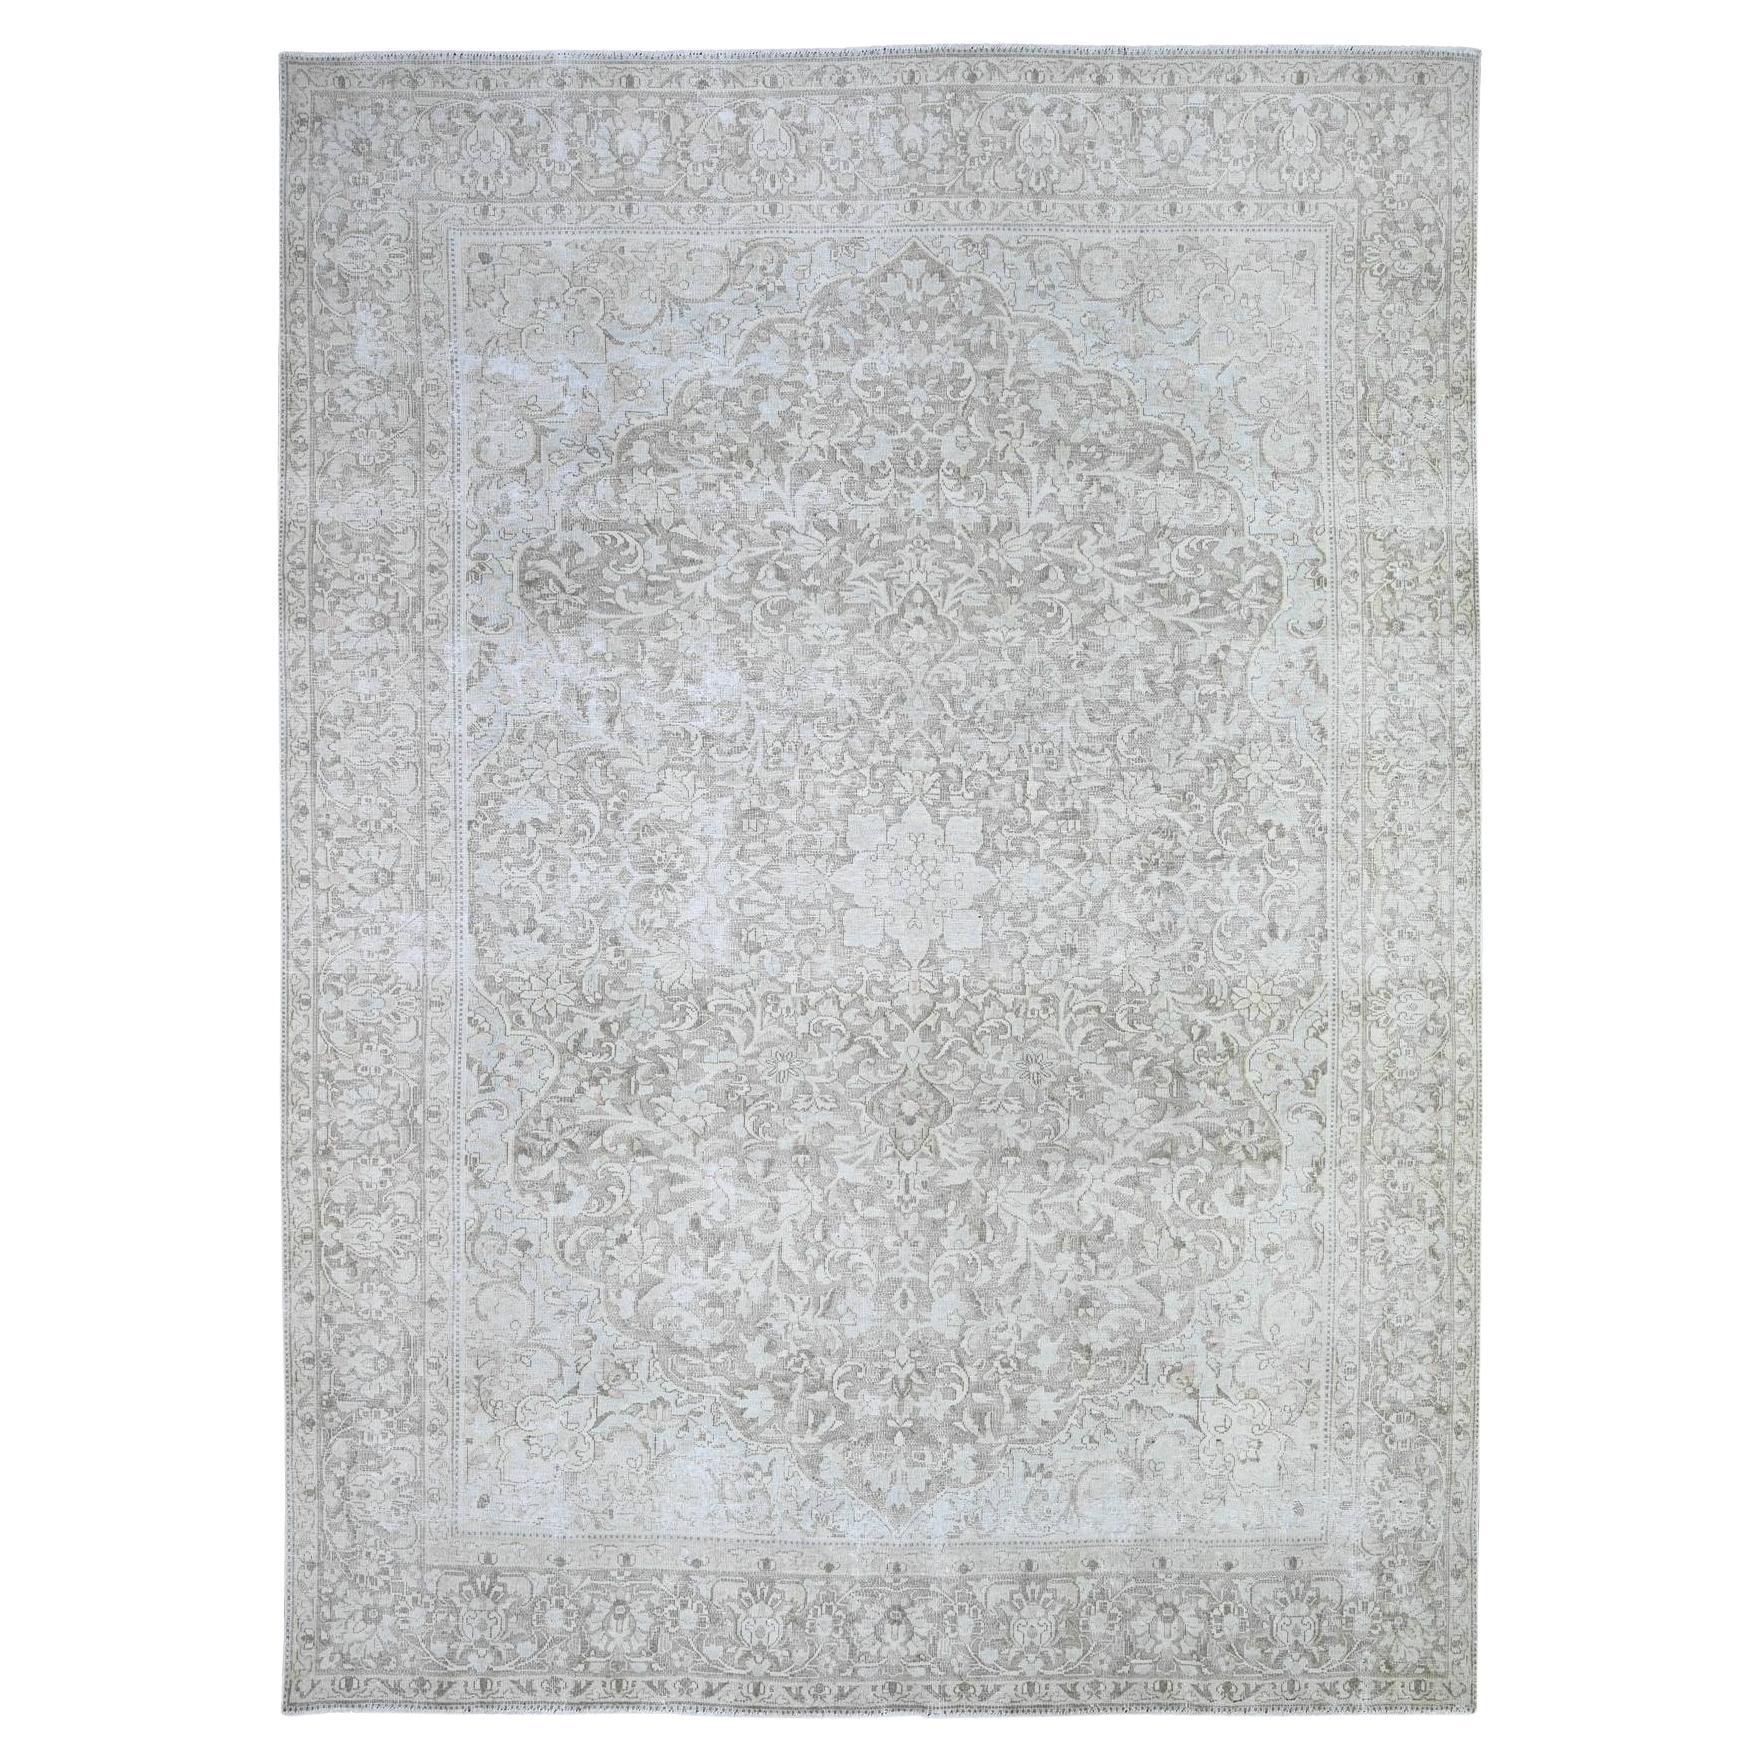 Monochromatic Wool Worn and Distressed Overdyed Vintage Kerman Hand Knotted Rug